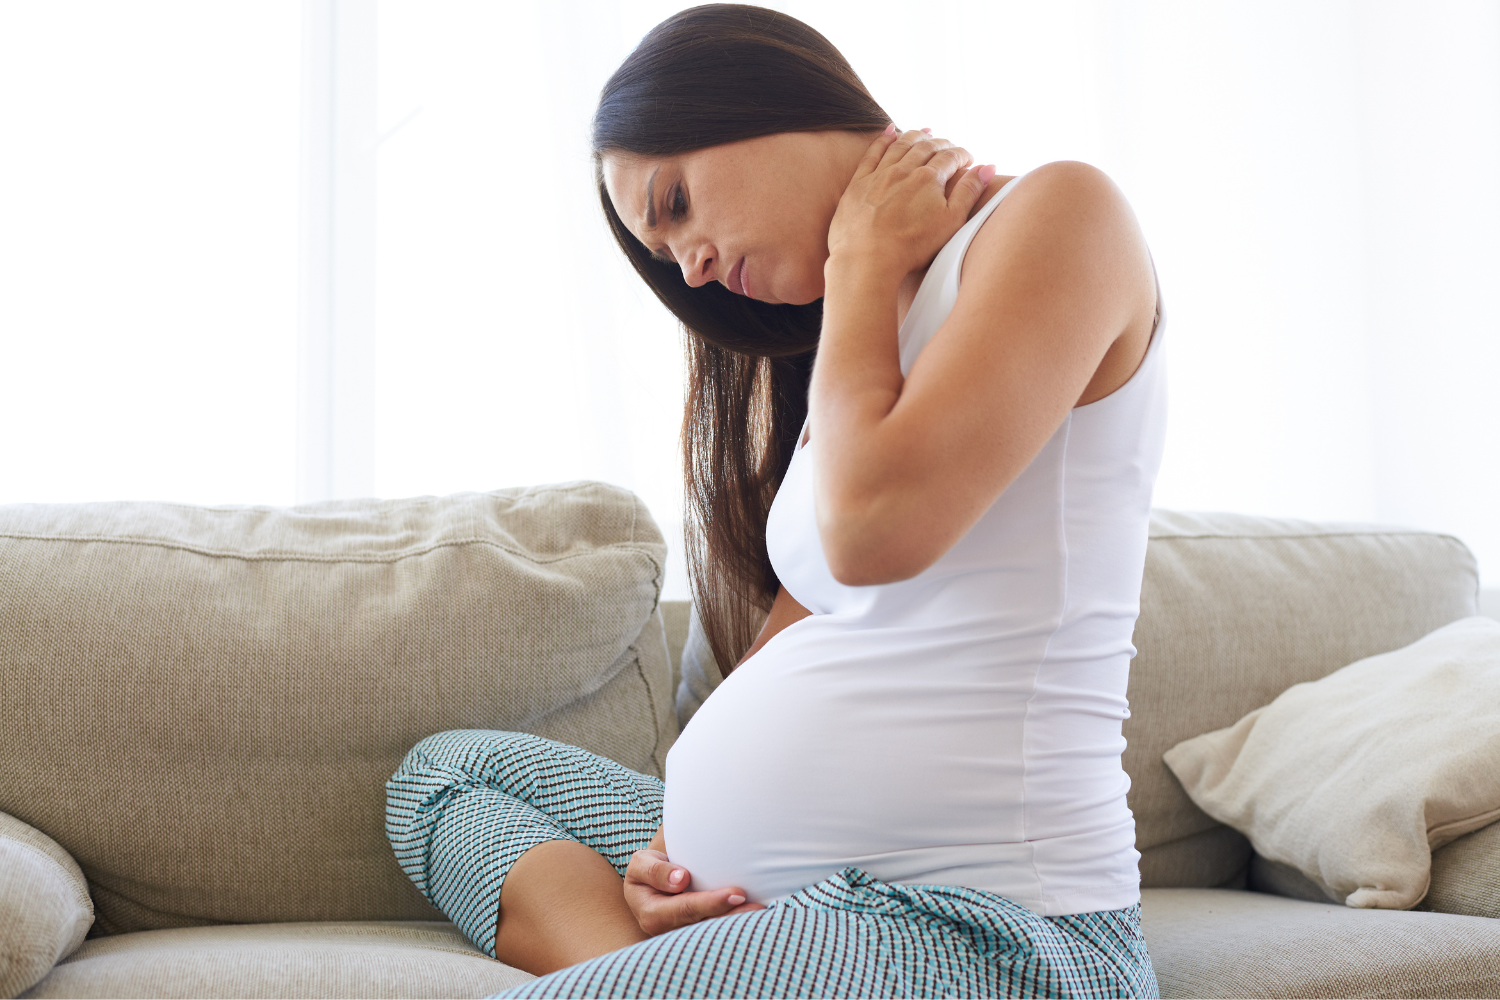 pregnant mom in a white tanktop and pajama pants sitting on a couch holding her neck with a look of pain on her face.